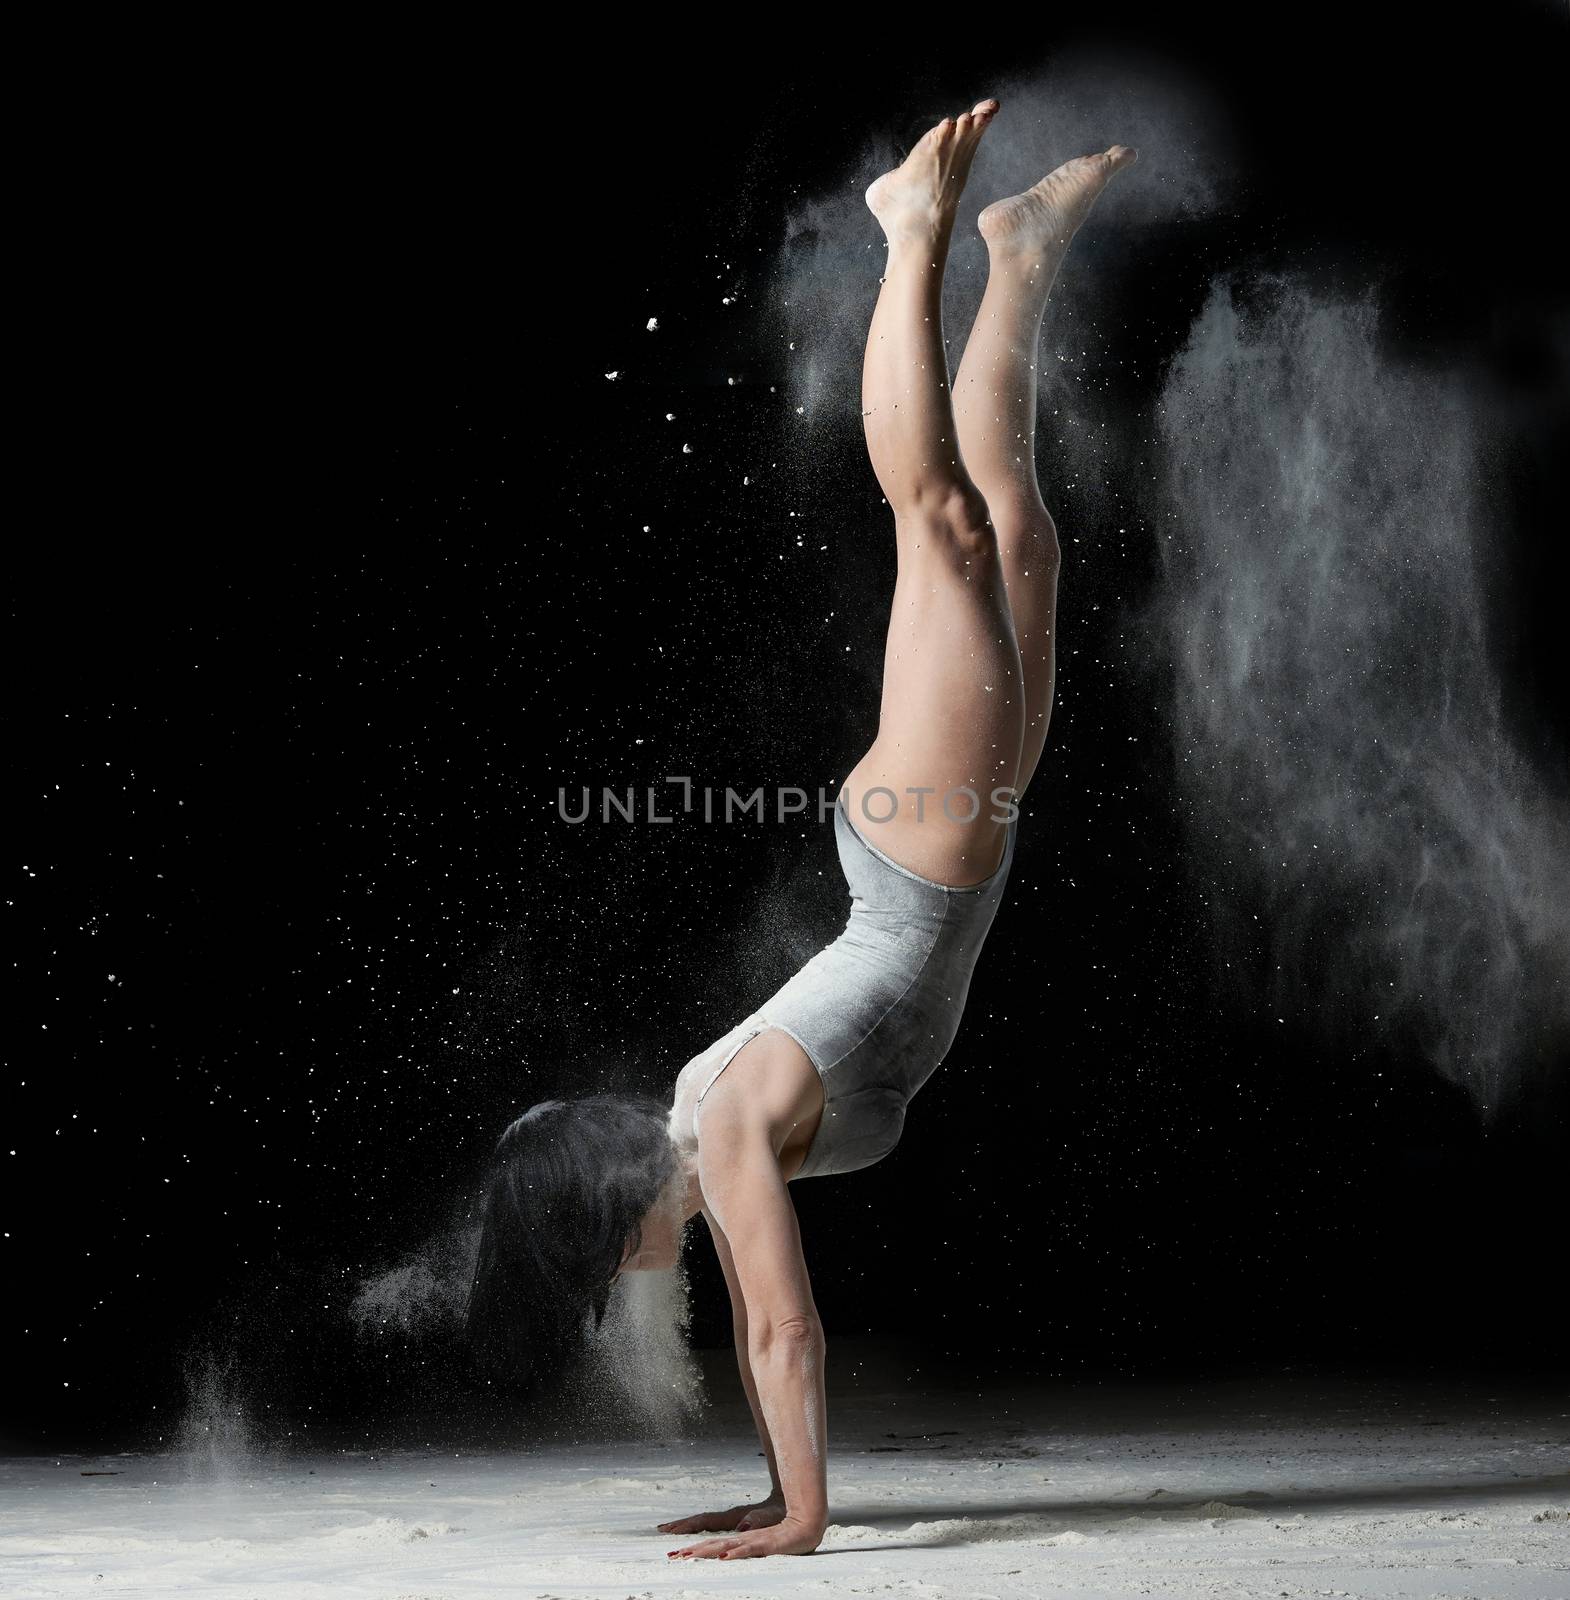 young woman with an athletic figure dressed in a black bodysuit stands upside down on her hands, black background with white flying flour, acrobatic exercises